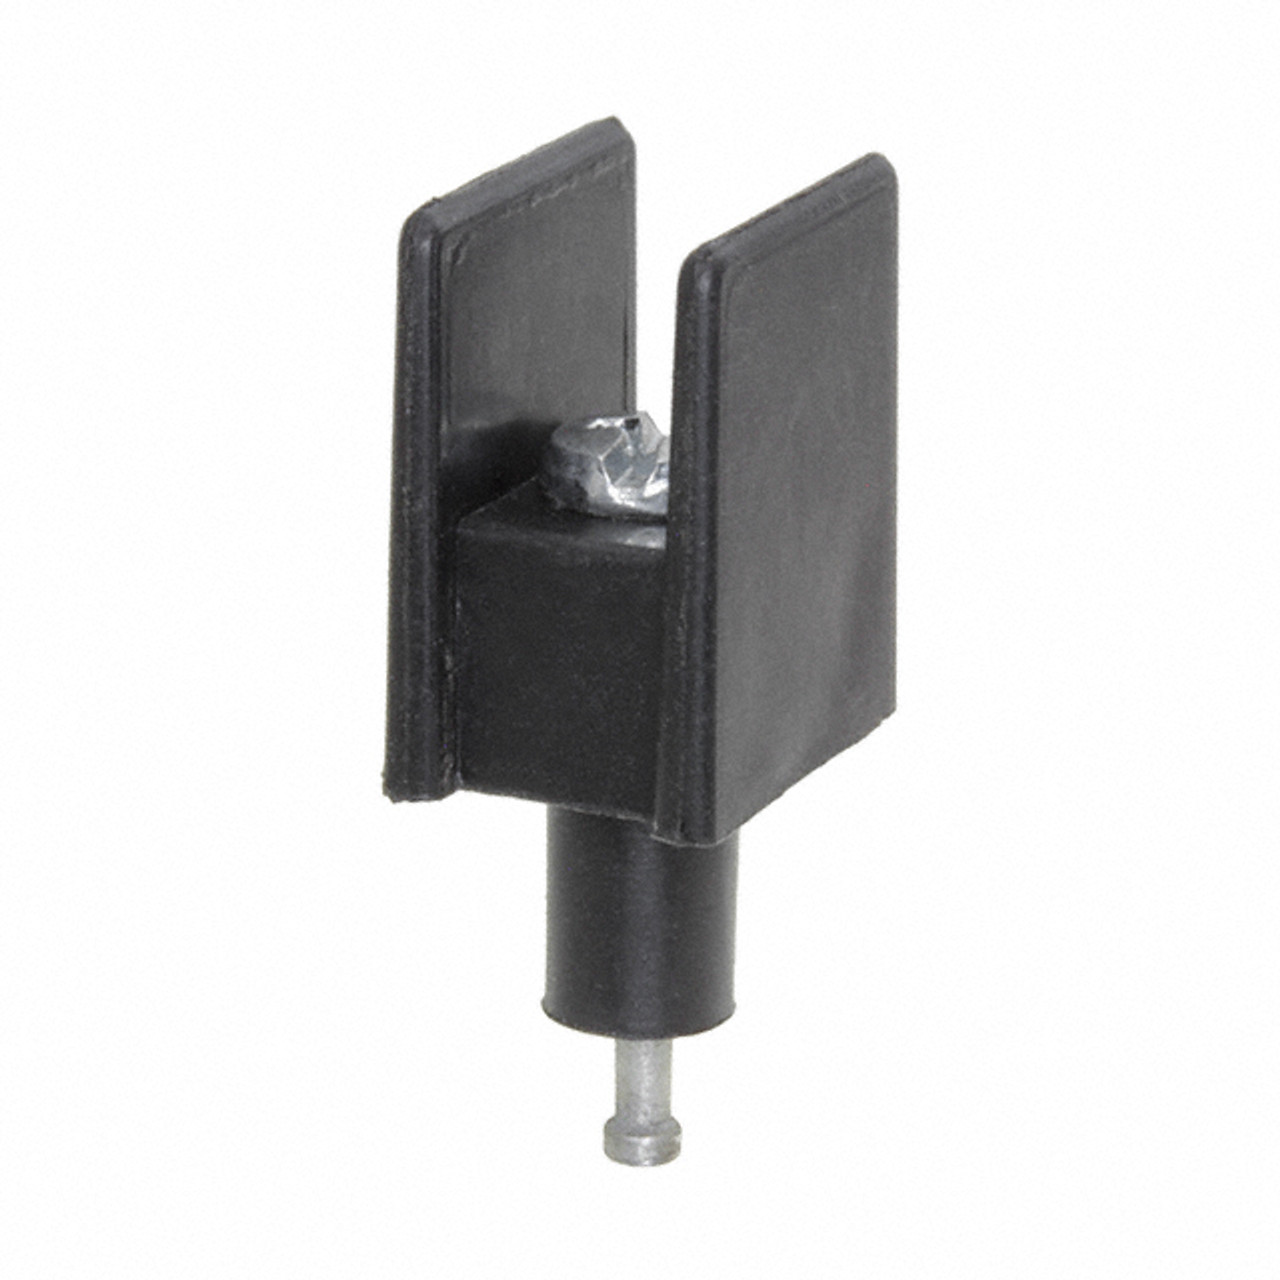 Curtis Industries CFT-1 Barrier Style Terminal Blocks